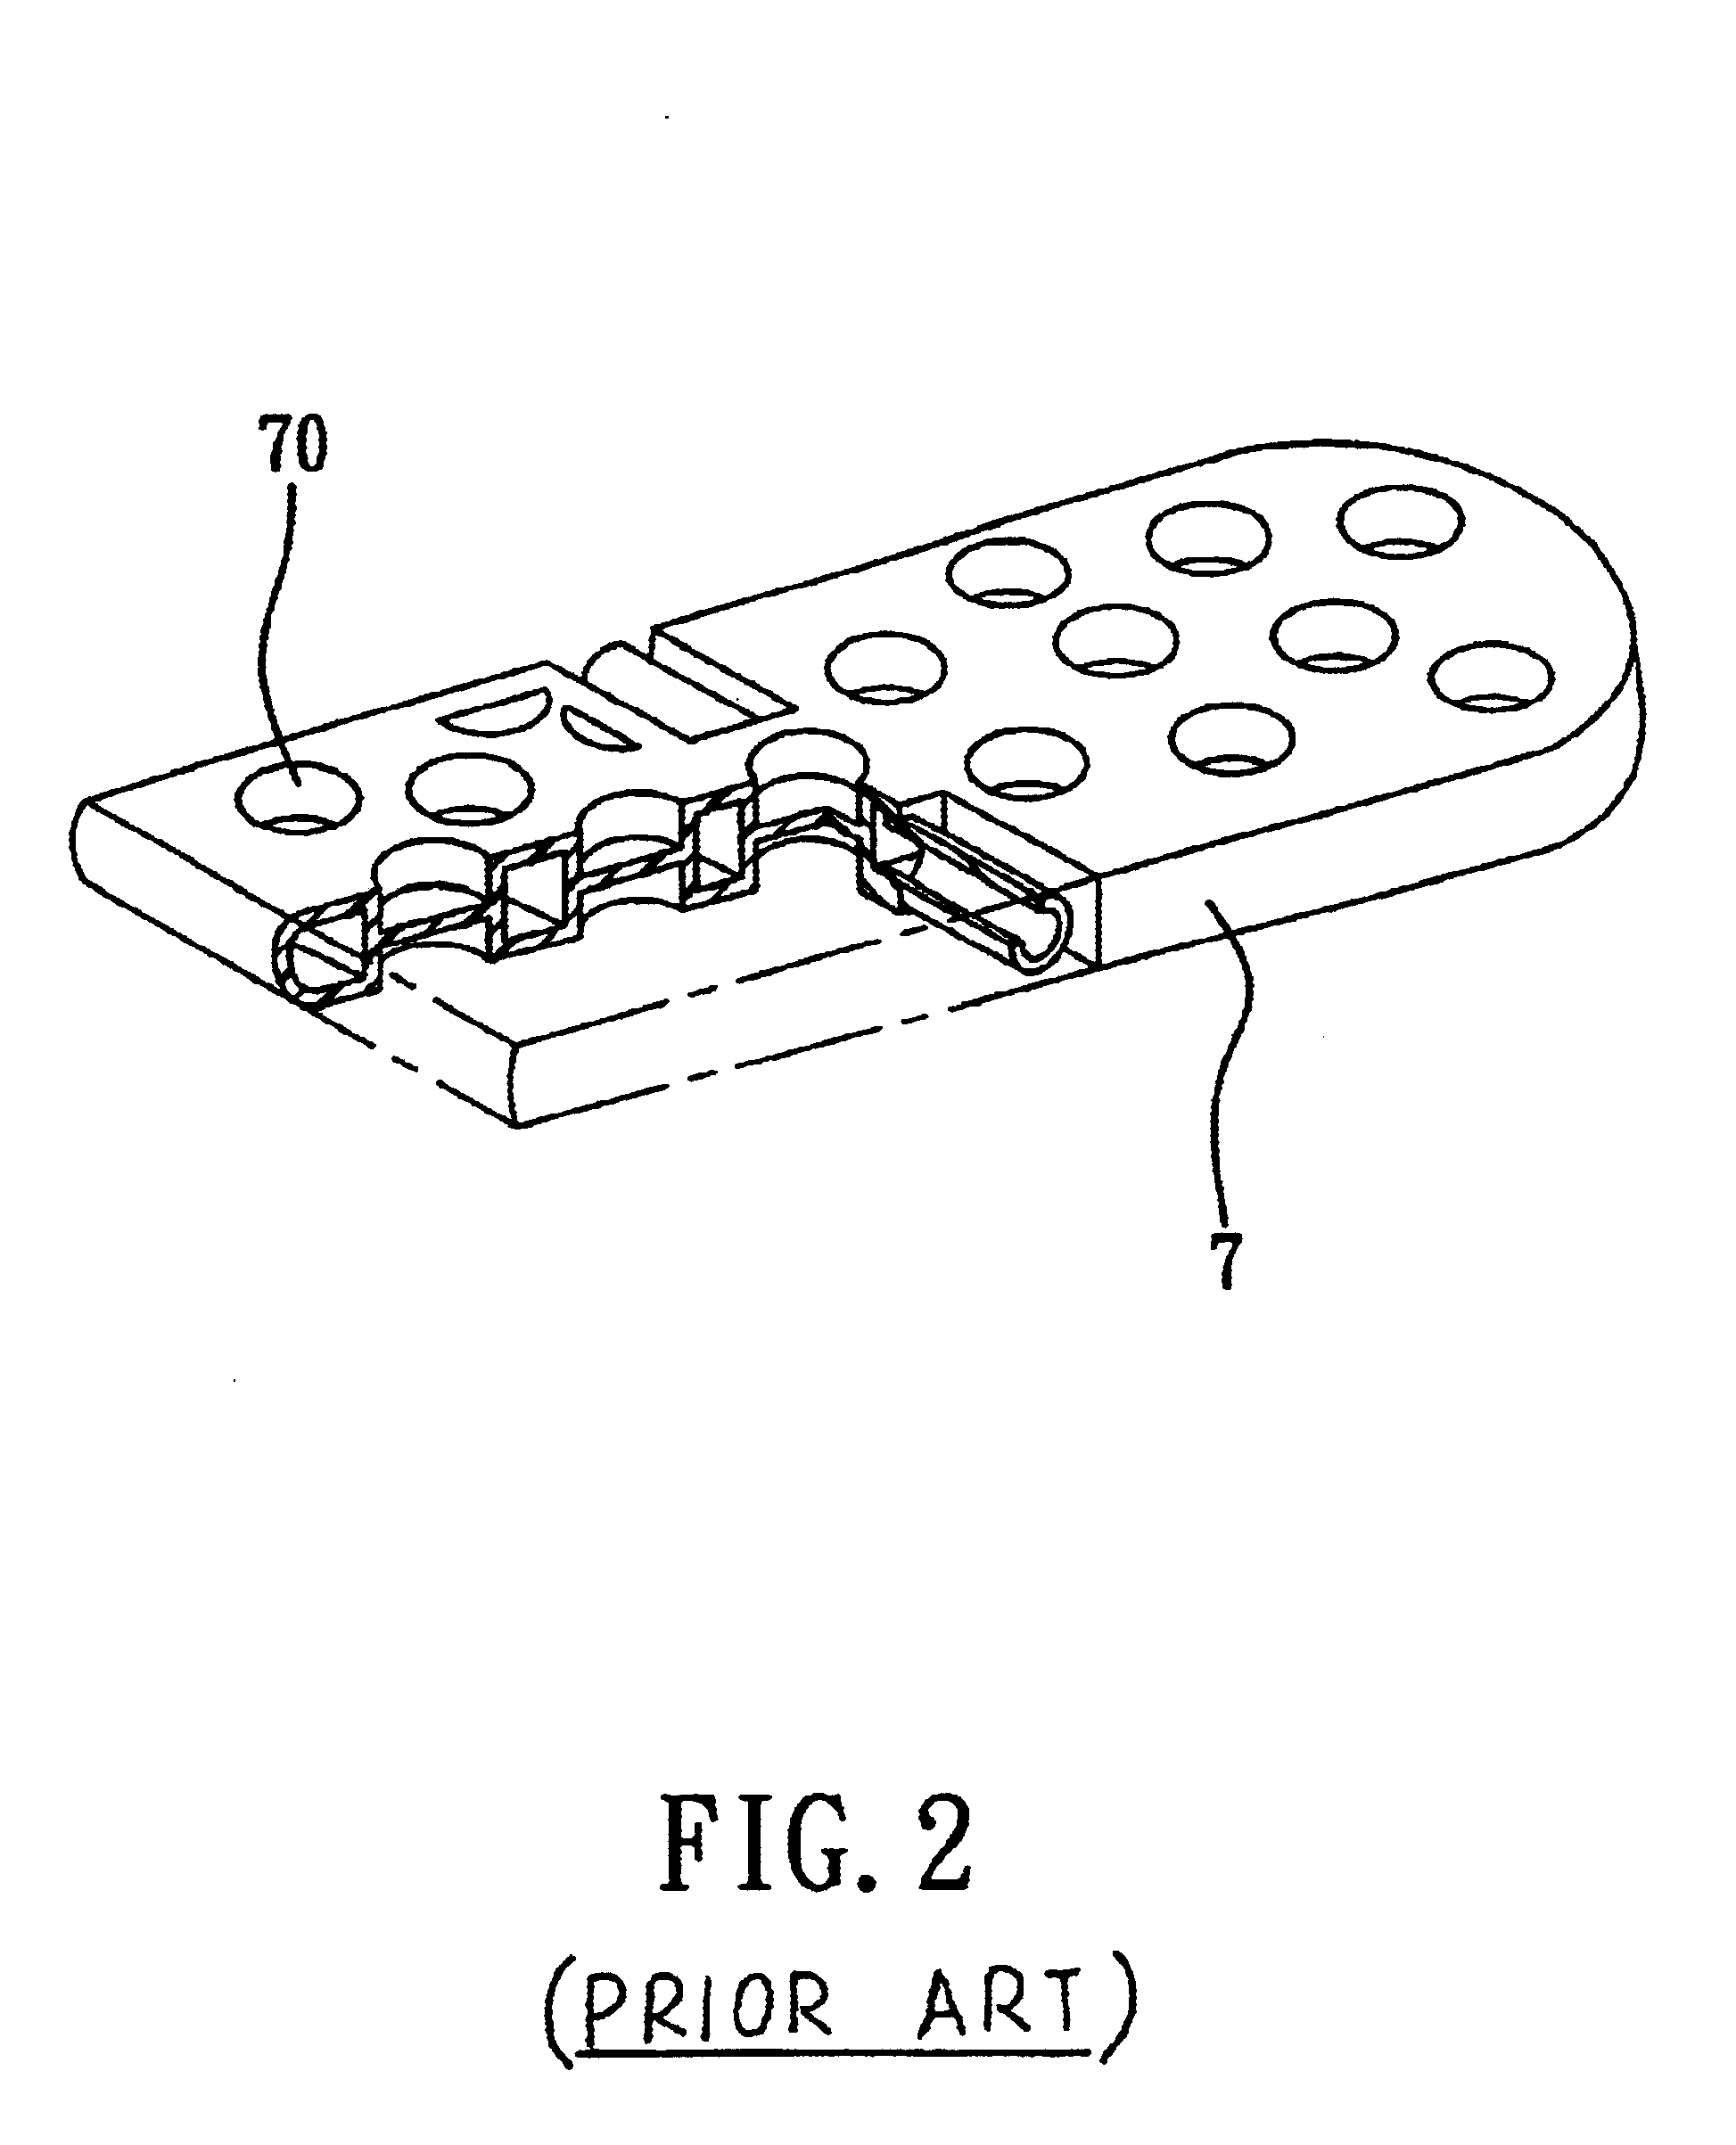 Footwear with an air cushion and a method for making the same